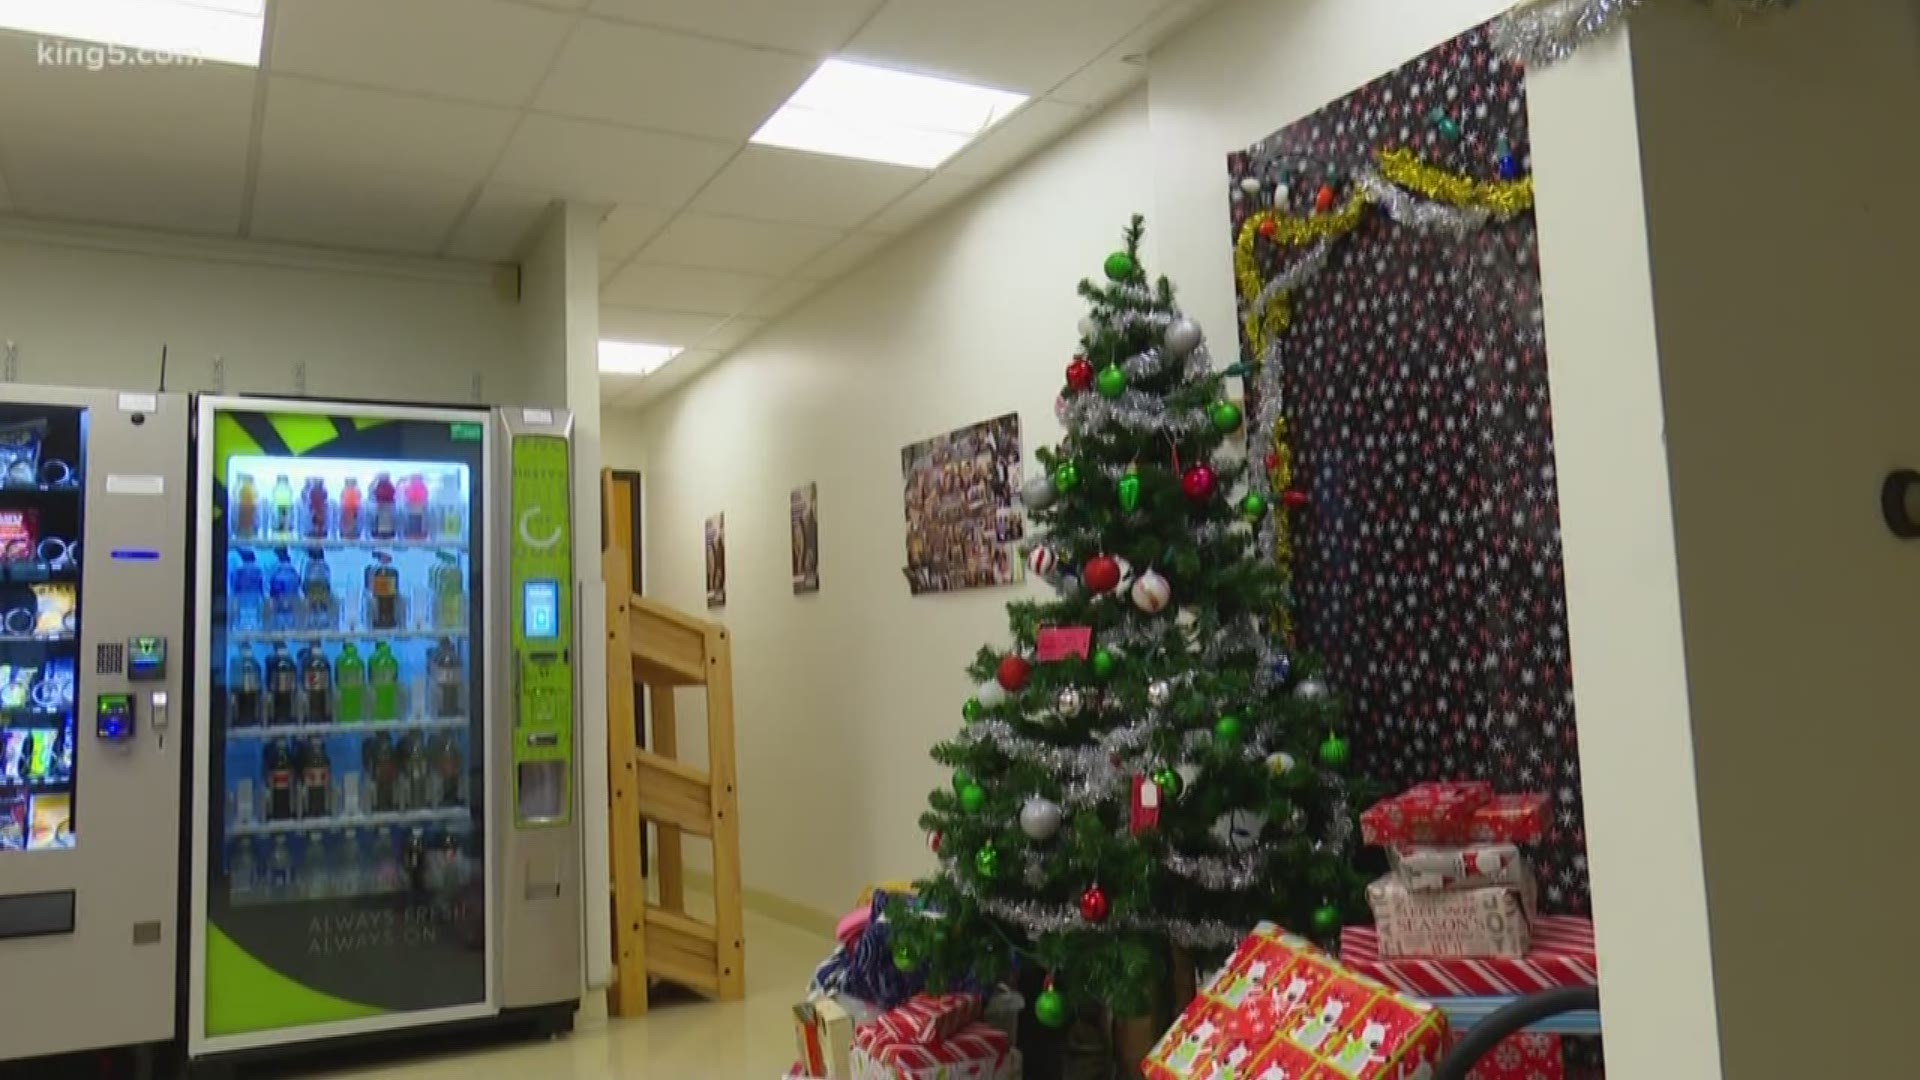 Lynwood's Kasier Permamente clinic goes above and beyond for its "adopted" family this Christmas. KING 5's Vanessa Misciagna reports.